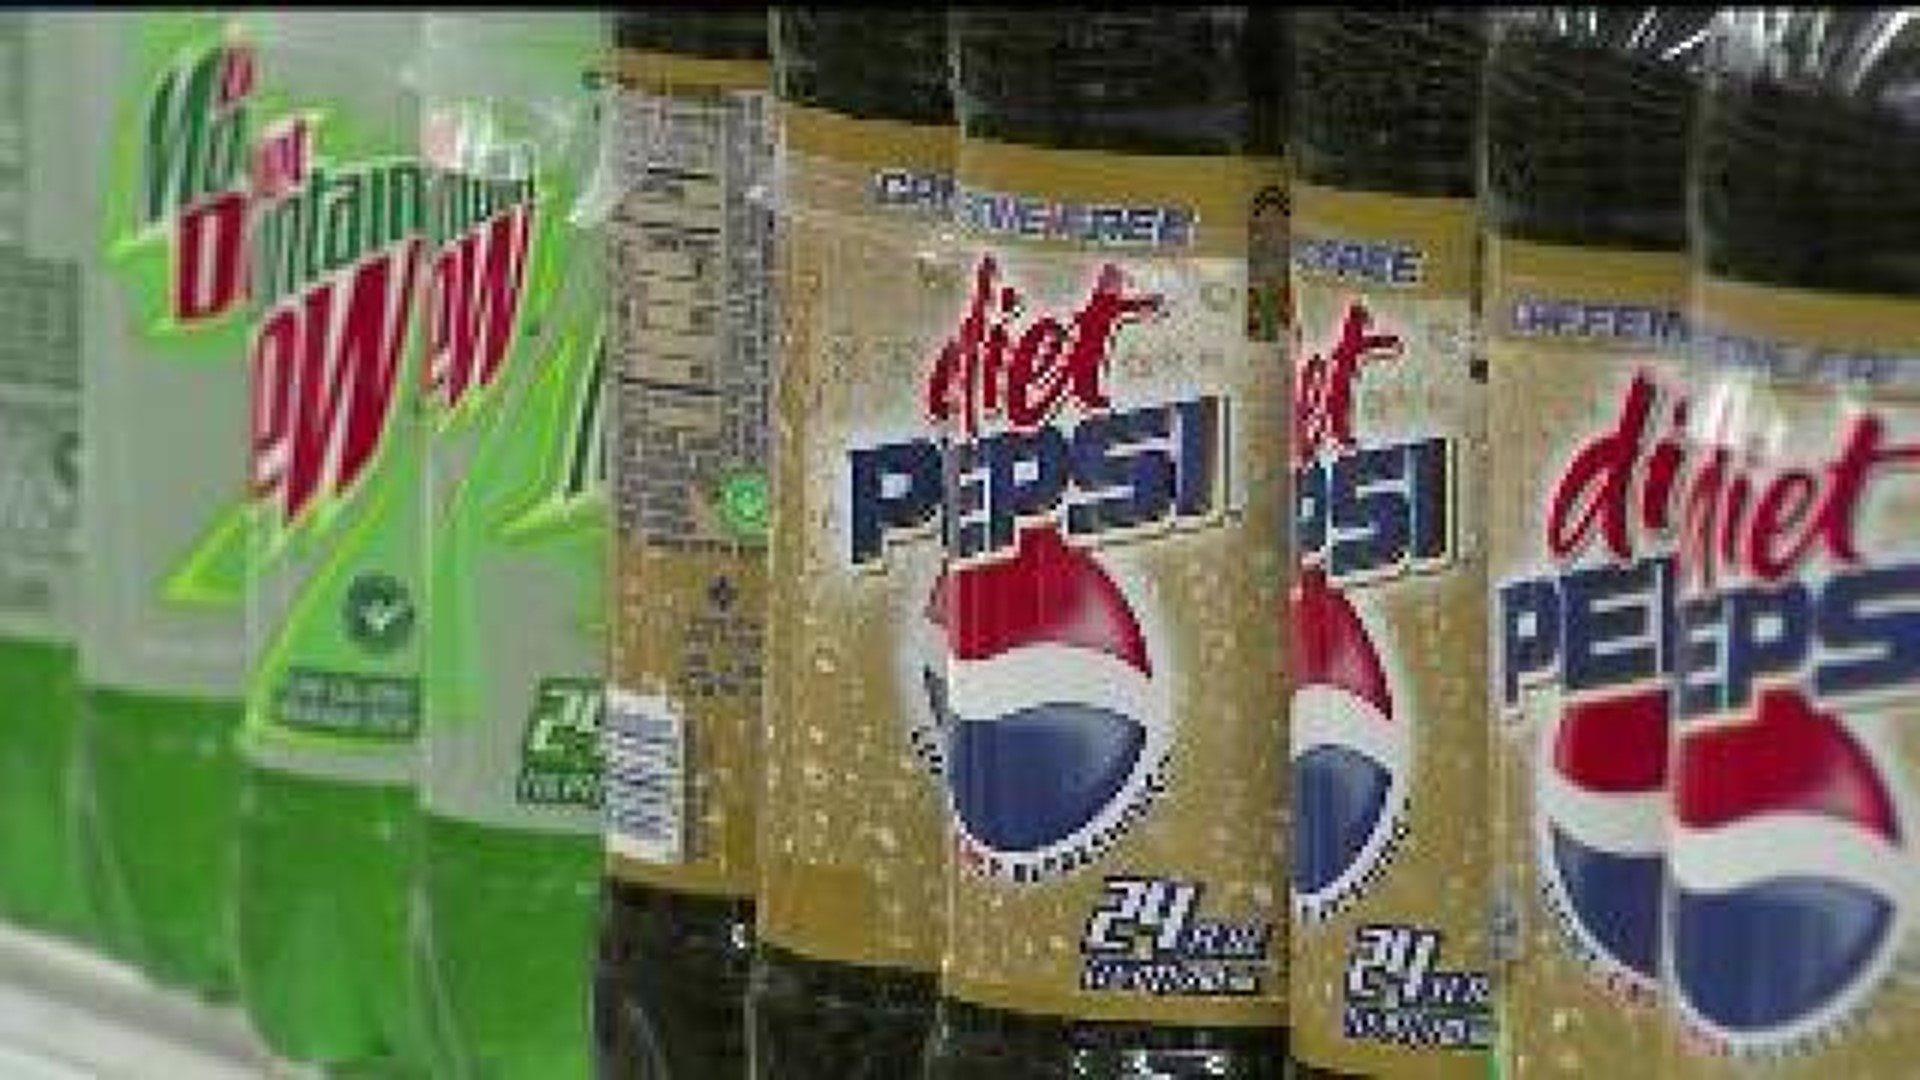 Illinois may implement a soda tax